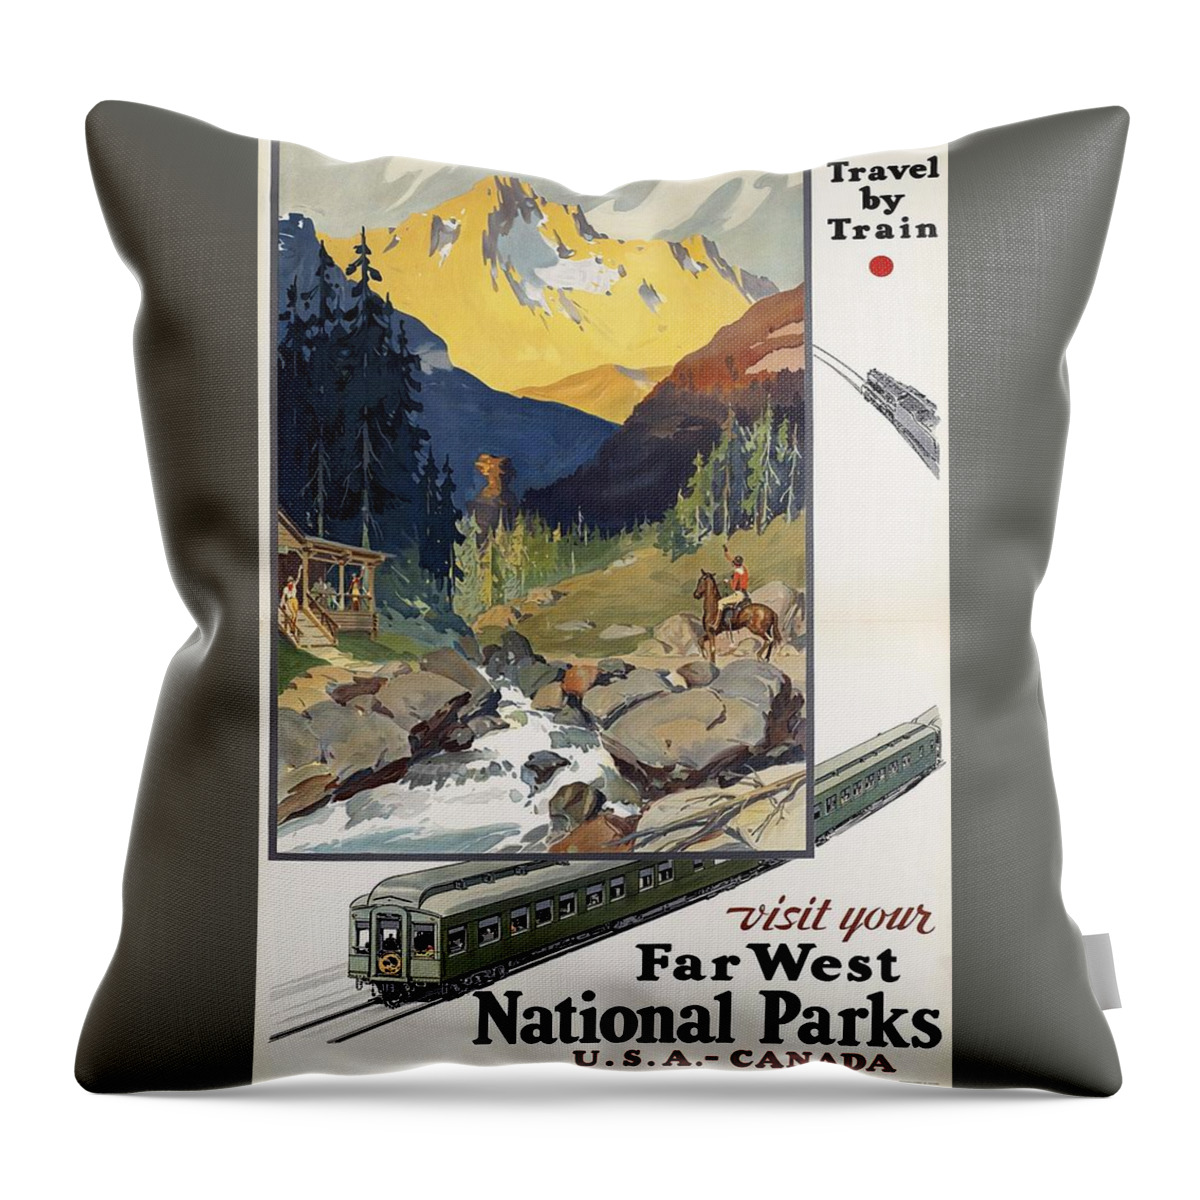 Far West National Parks Throw Pillow featuring the painting Far West National Parks - Vintage Travel Poster by Studio Grafiikka